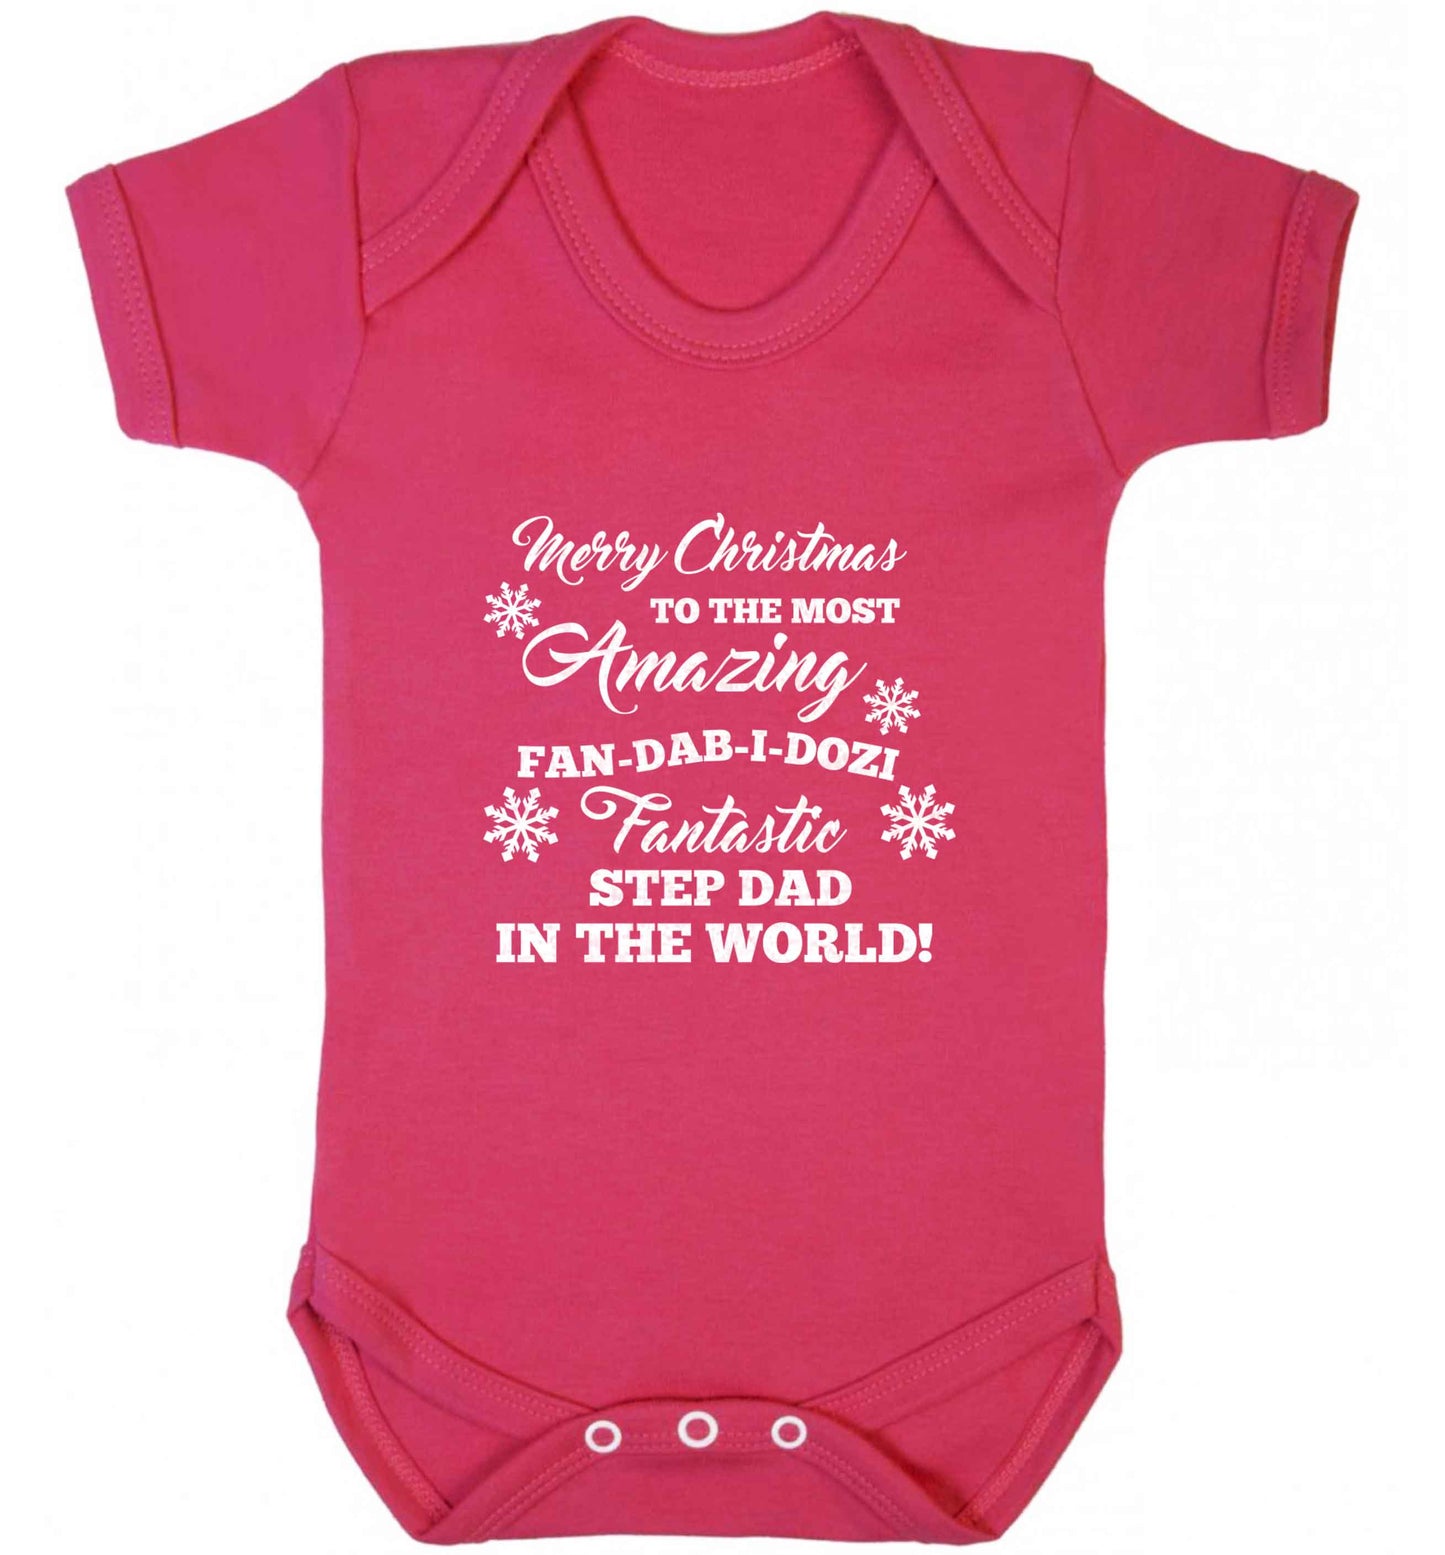 Merry Christmas to the most amazing fan-dab-i-dozi fantasic Step Dad in the world baby vest dark pink 18-24 months